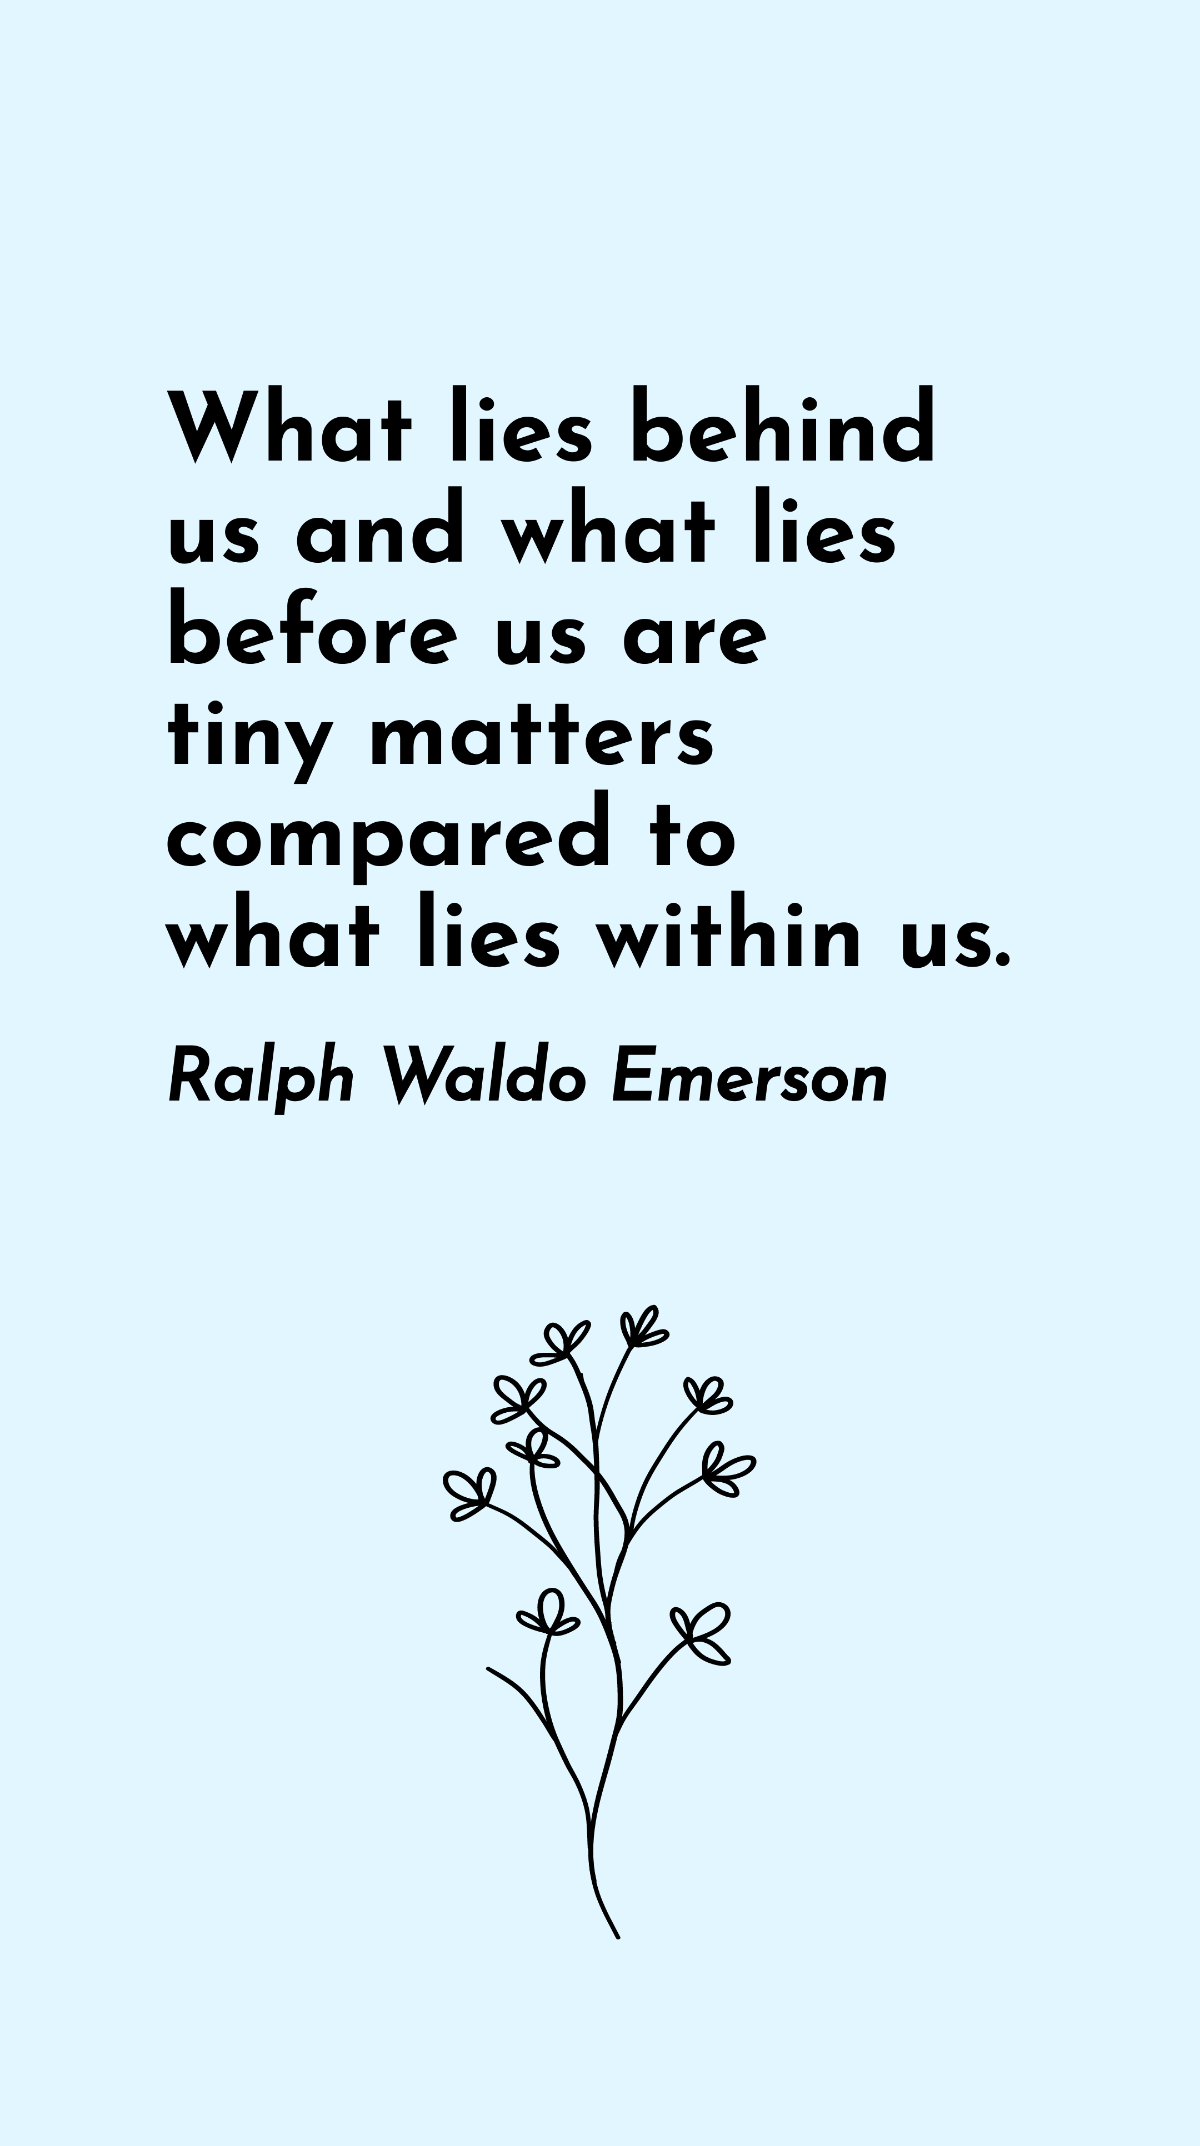 Ralph Waldo Emerson - What lies behind us and what lies before us are tiny matters compared to what lies within us.